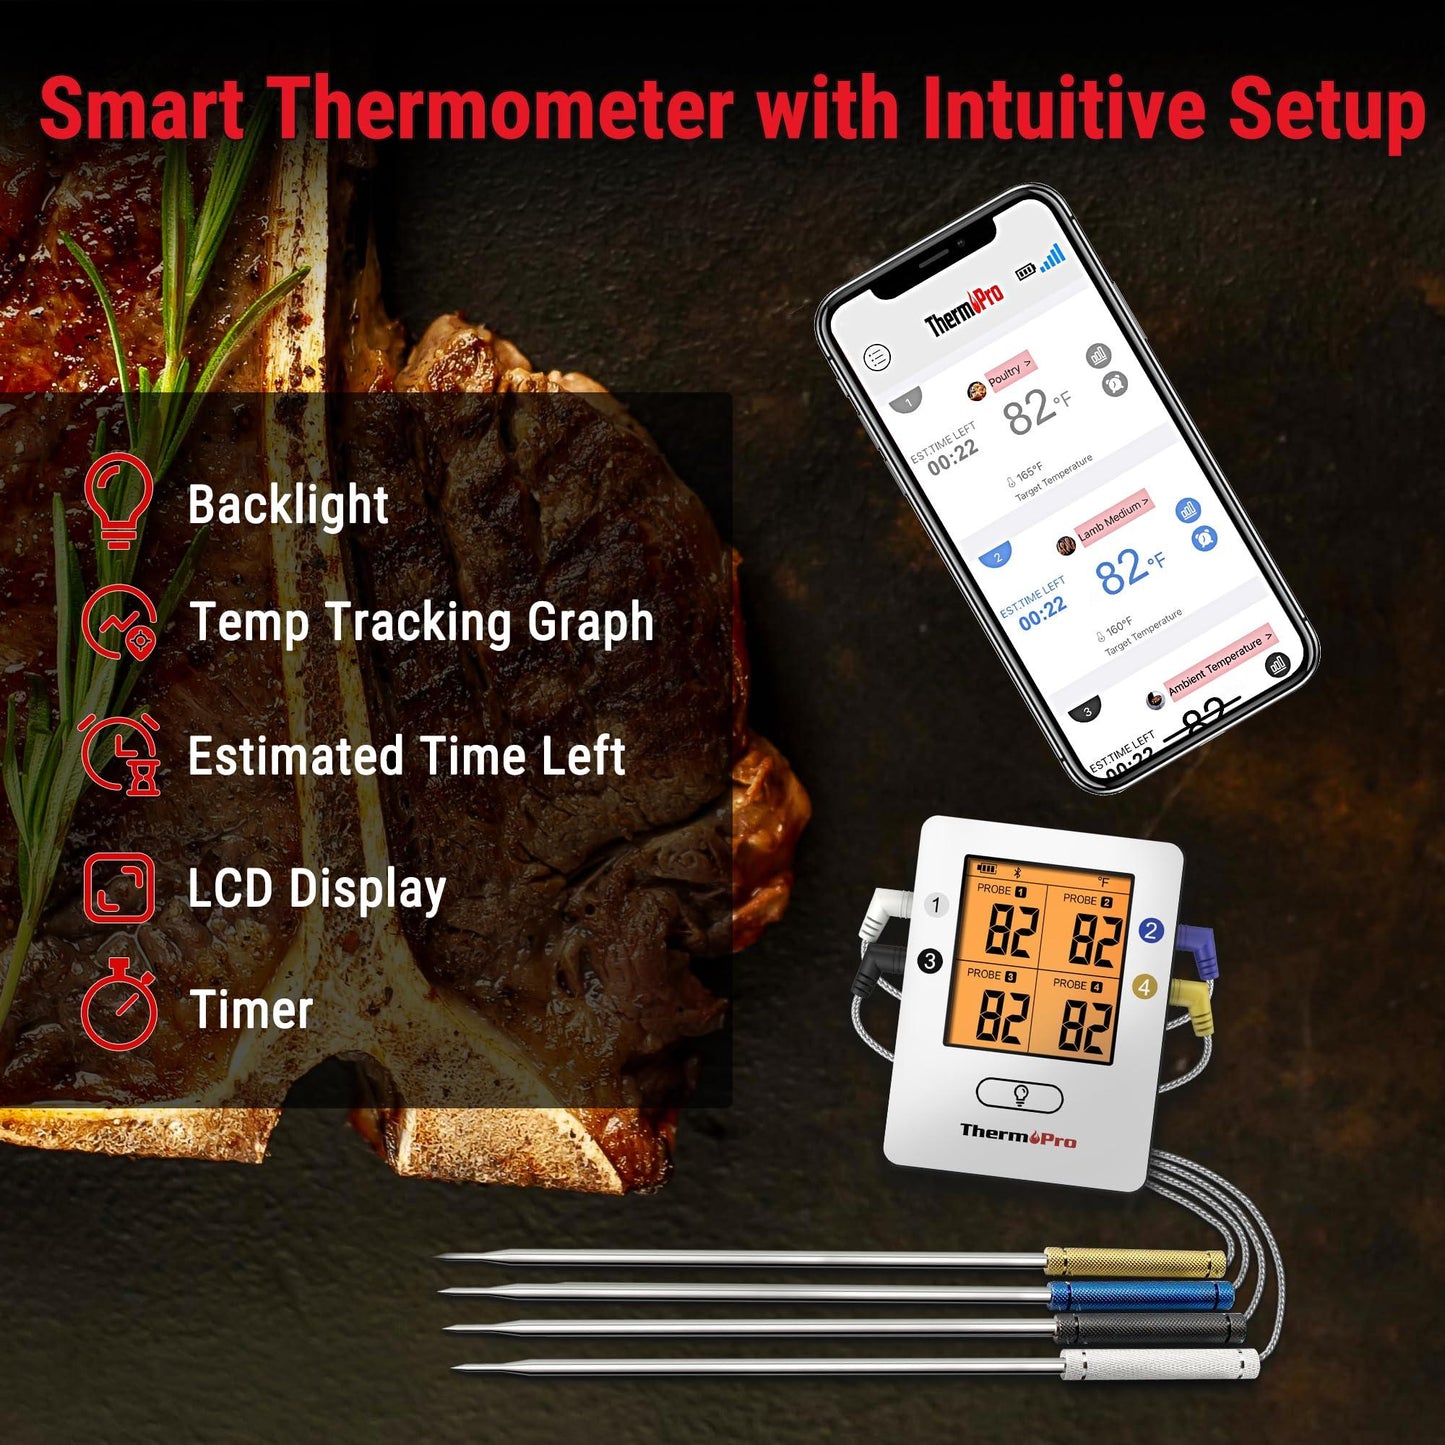 ThermoPro TP25 500ft Wireless Bluetooth Meat LCD Thermometer with 4 Temperature Probes Smart Digital Cooking BBQ Thermometer for Grilling Oven Food Smoker Thermometer, Rechargeable - CookCave